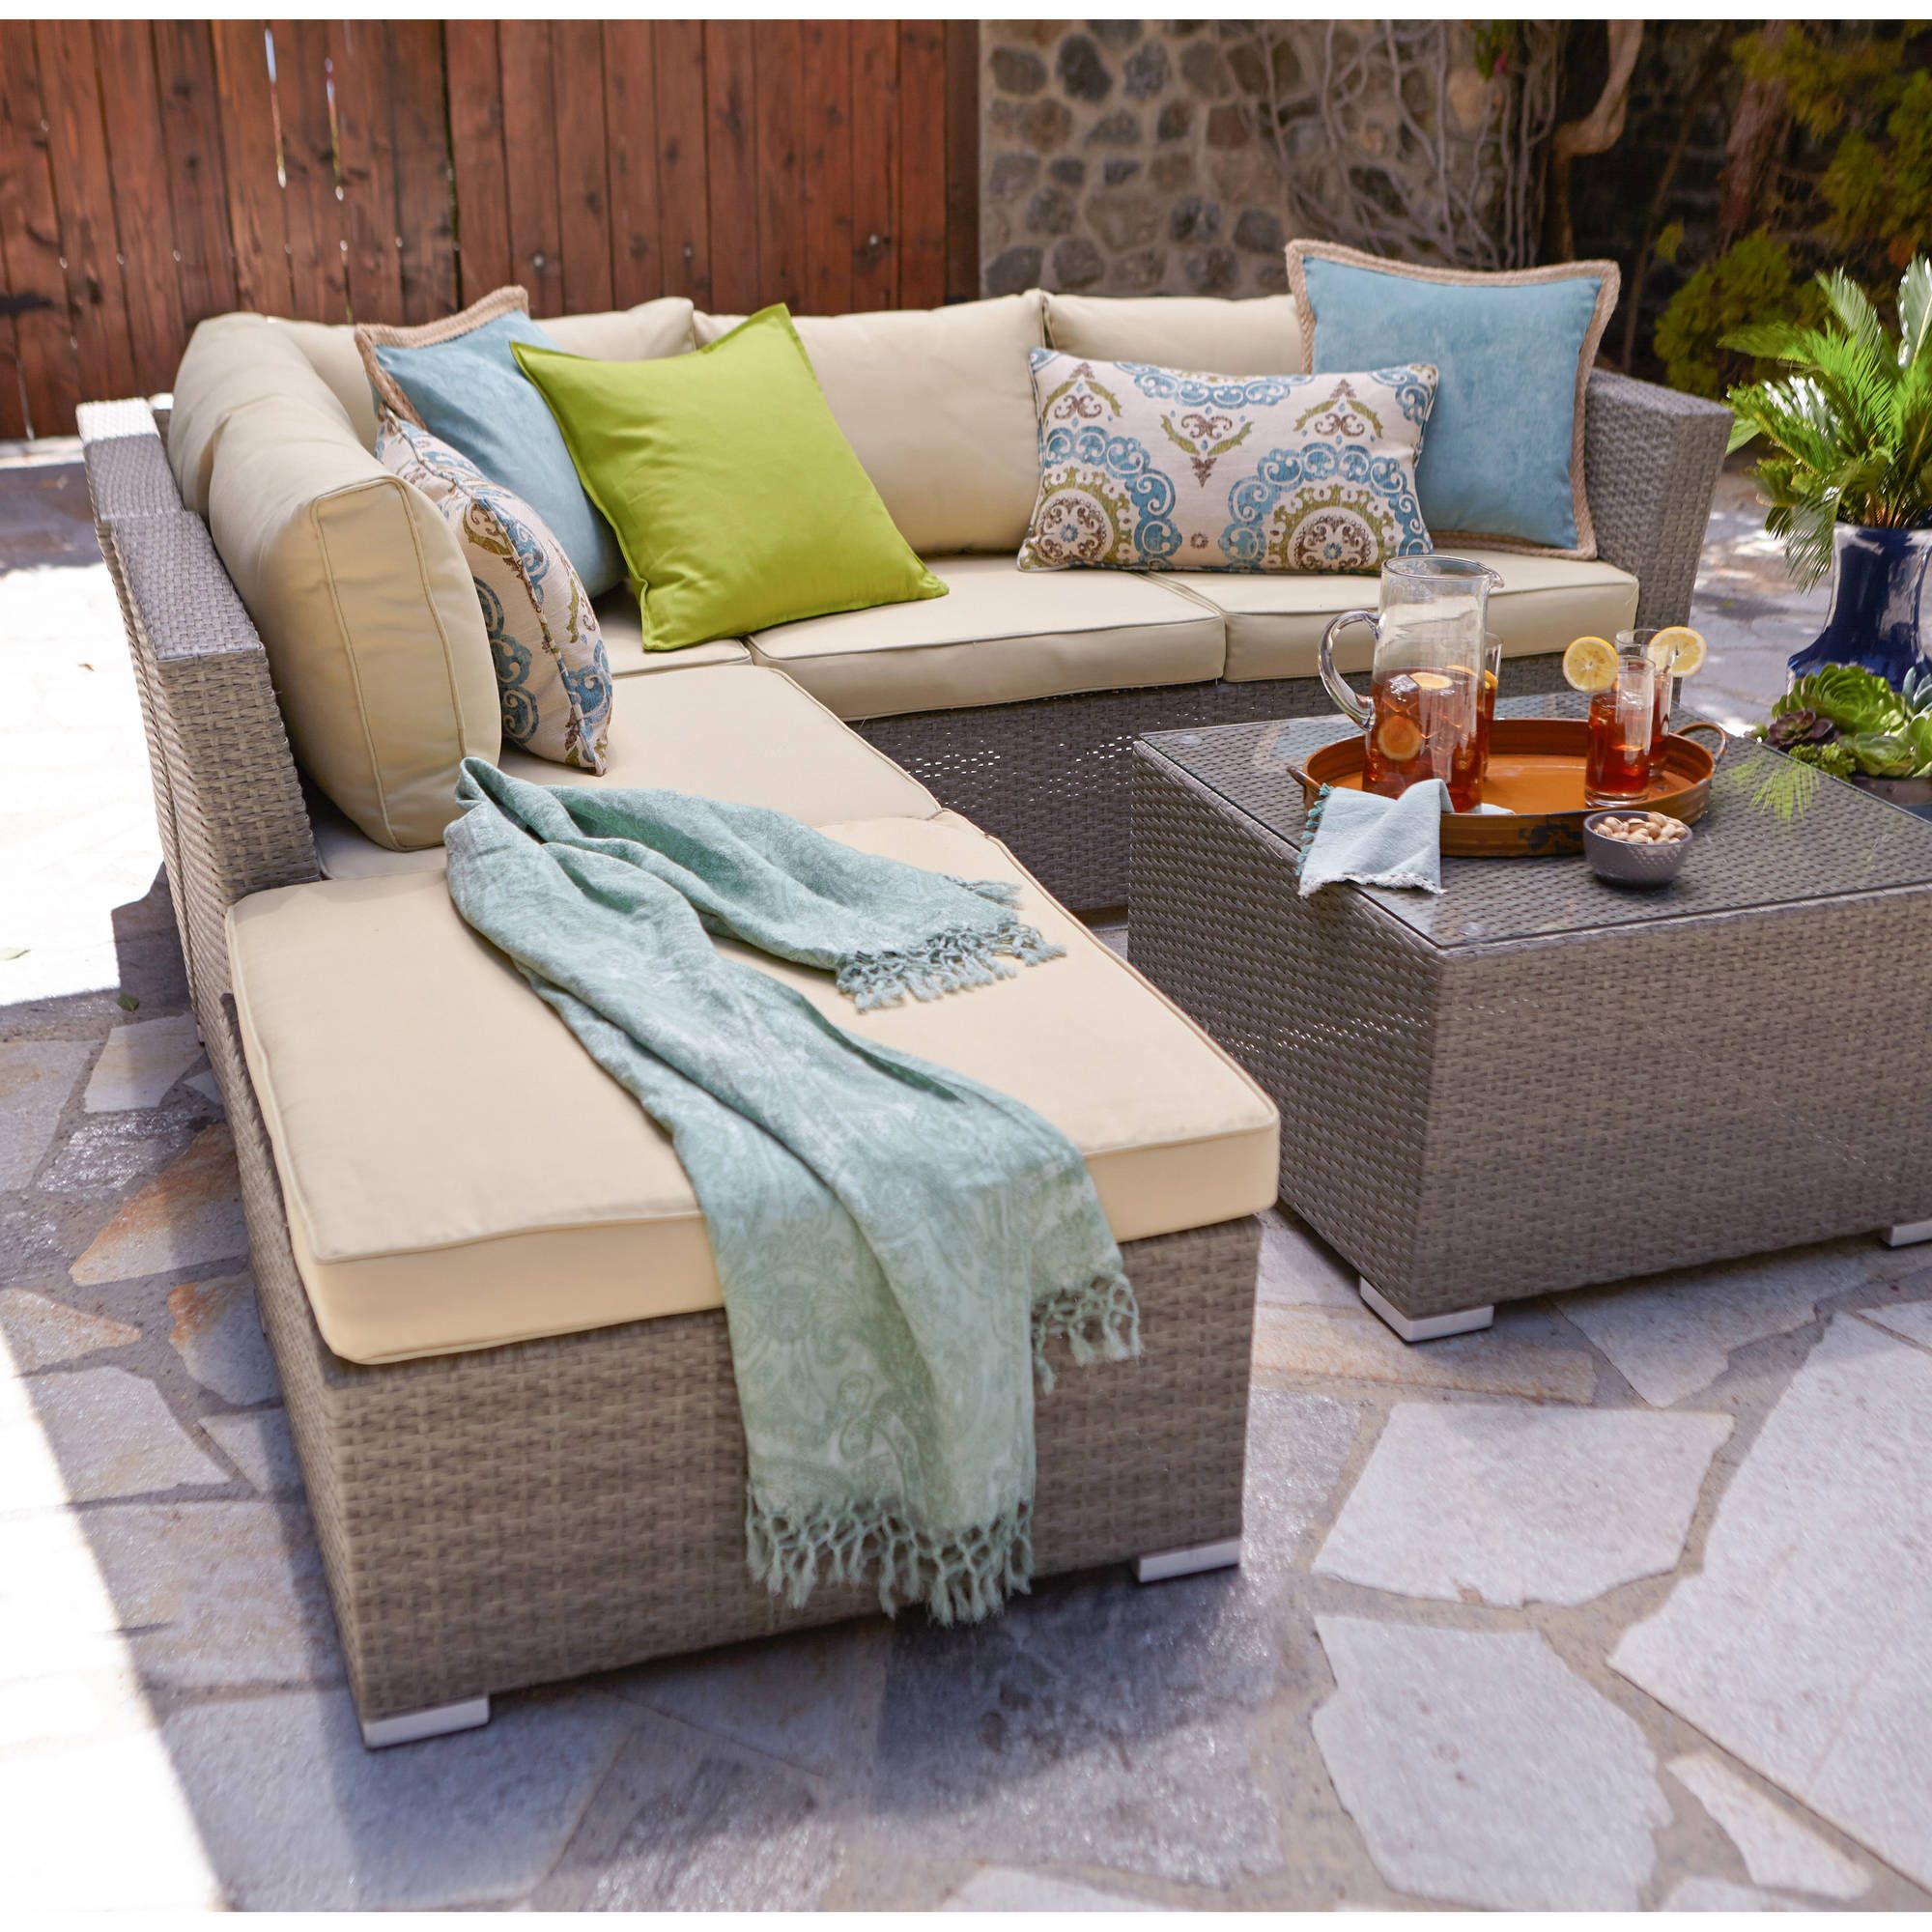 Incadozo 5 Piece Outdoor Wicker Sectional Sofa Set, Rustic With 5 Piece Console Tables (View 3 of 20)